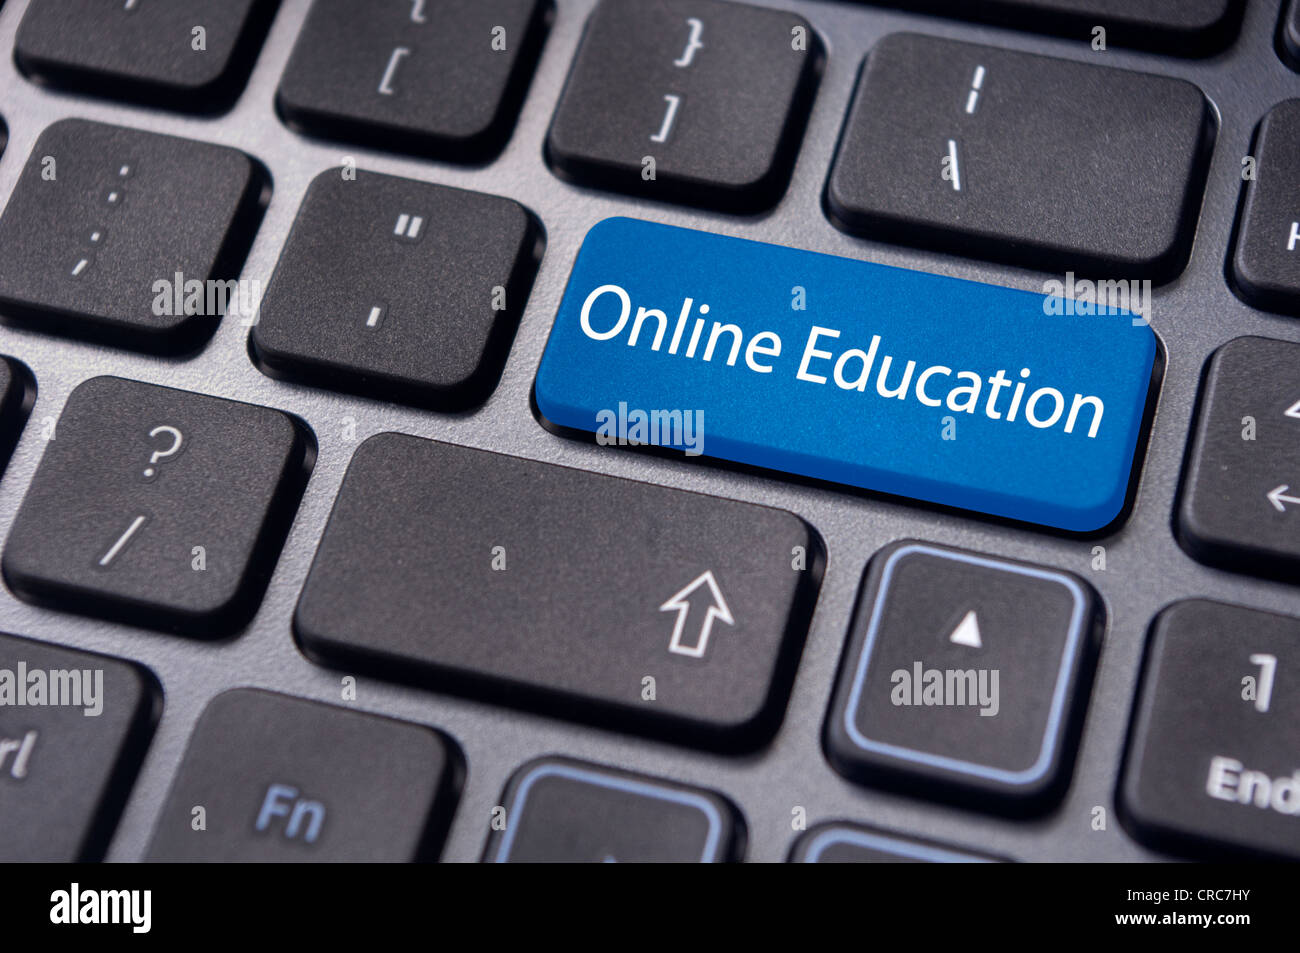 concepts of online education, with message on enter key of keyboard. Stock Photo